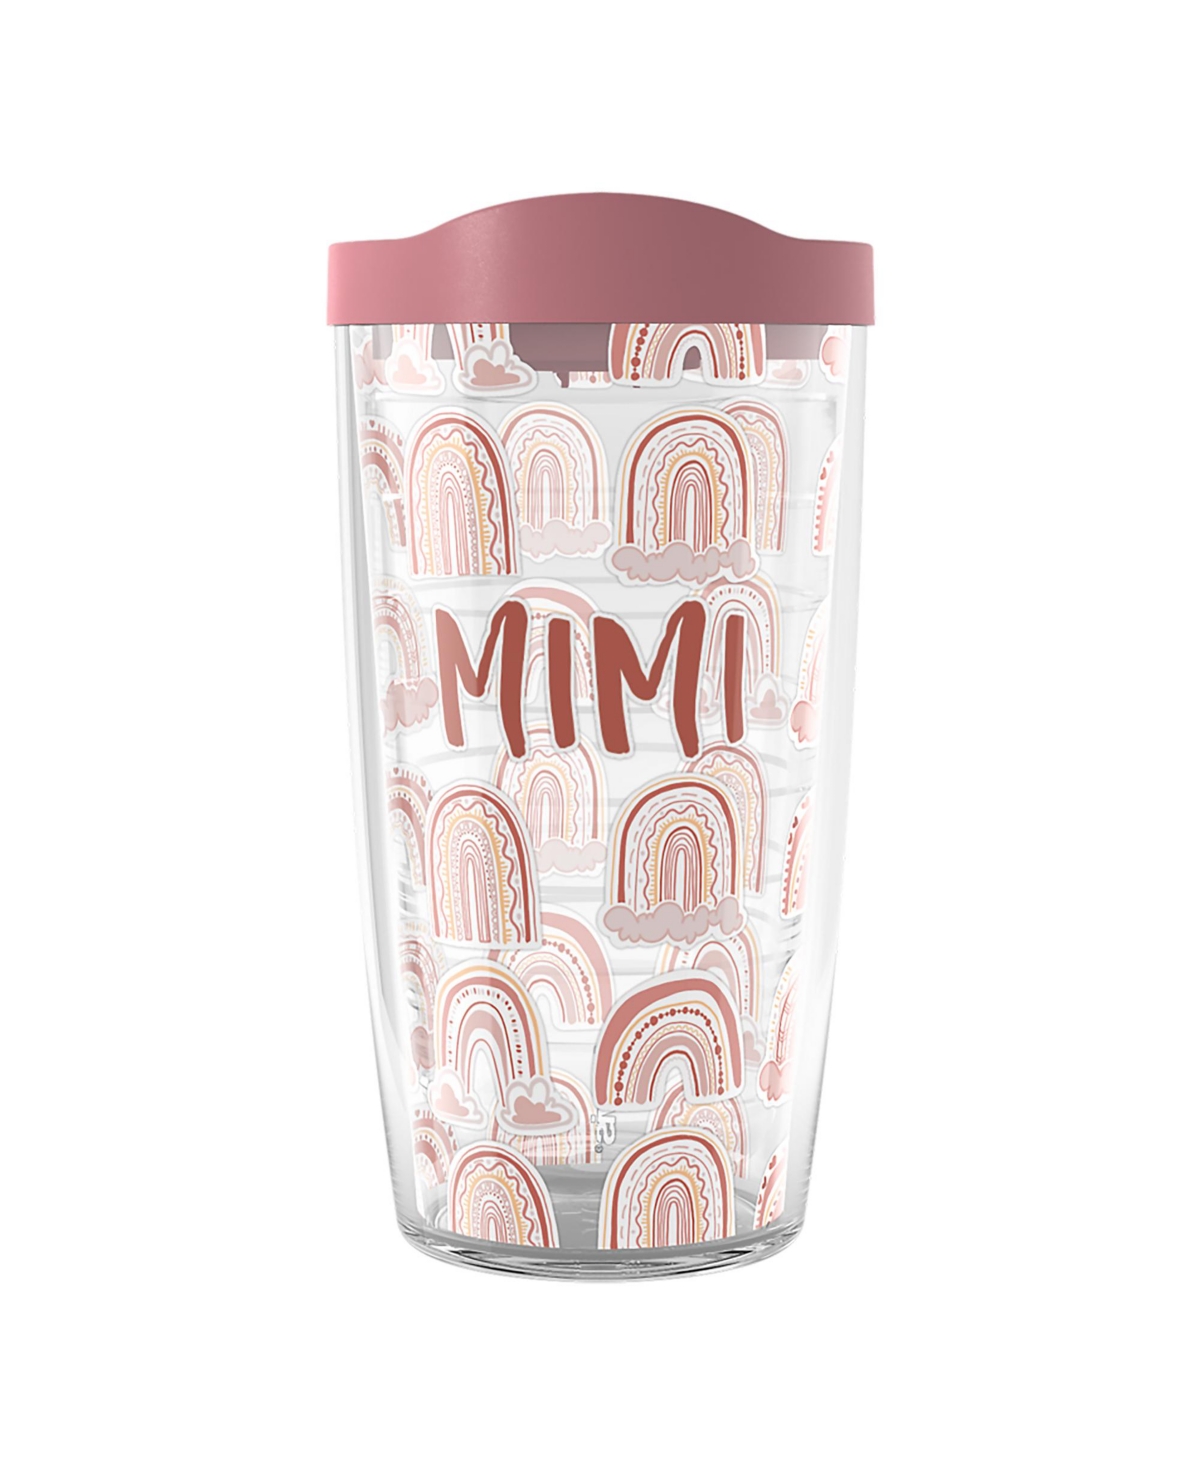 Tervis Tumbler Tervis Boho Rainbow Mimi Made In Usa Double Walled Insulated Tumbler Travel Cup Keeps Drinks Cold & In Open Miscellaneous